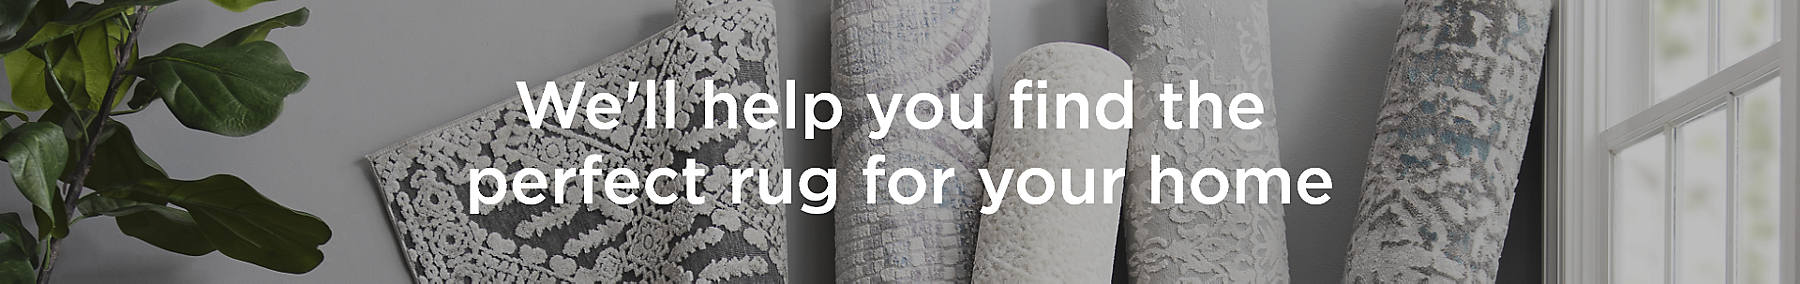 We'll help you find the perfect rug for your home